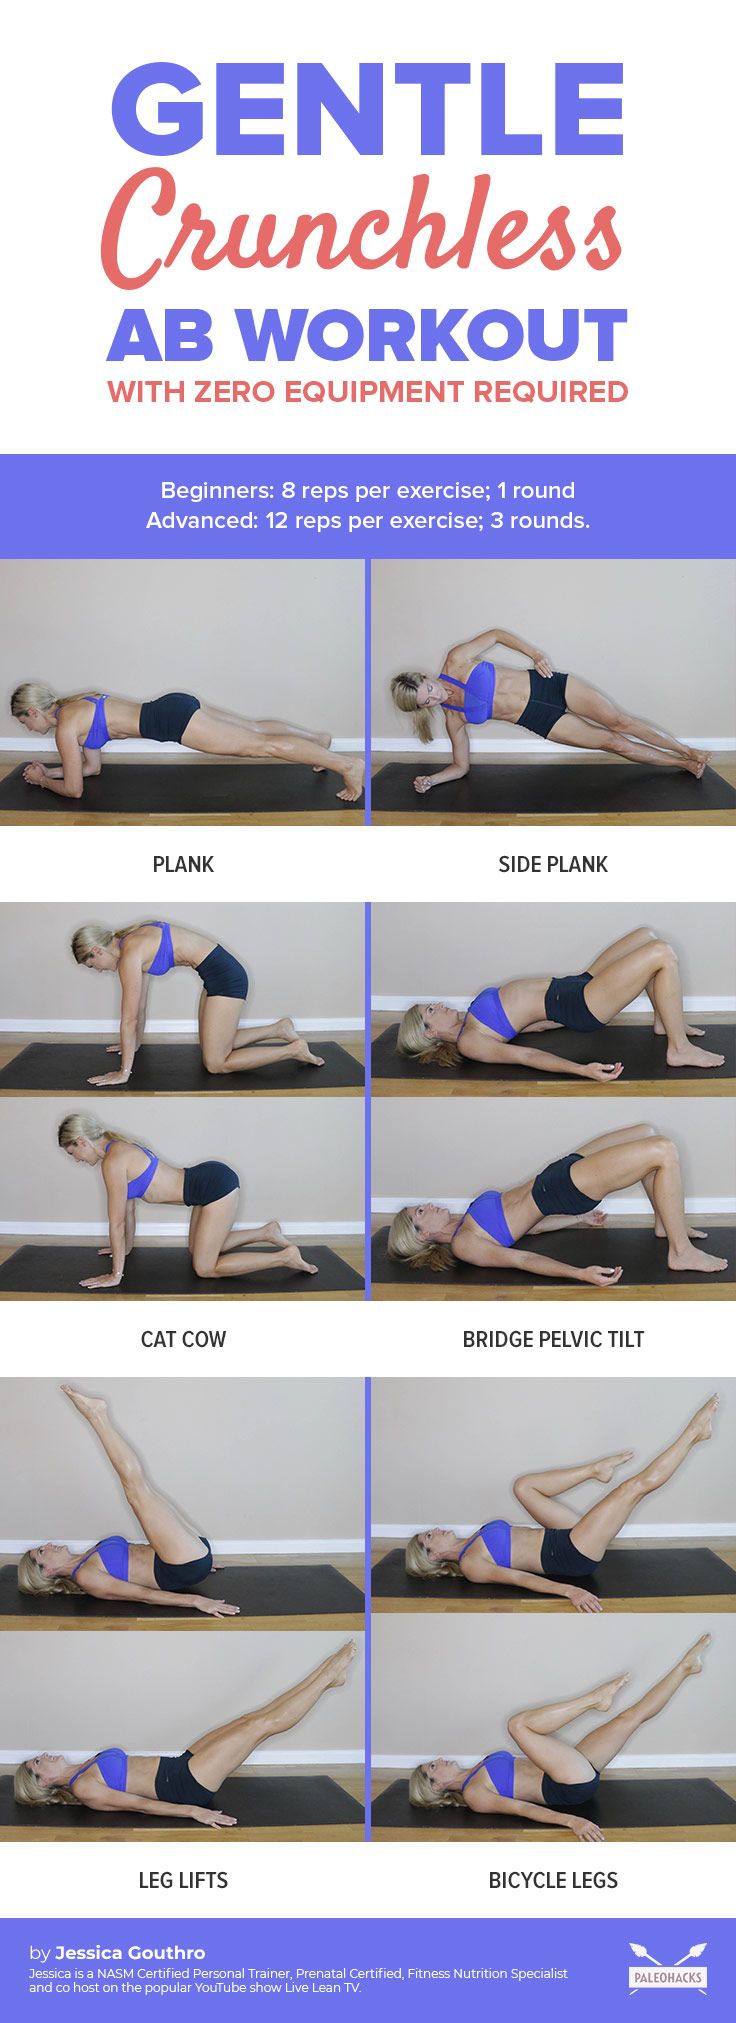 Tone and tighten your abs - without a single crunch. These six moves work your abs and deep inner core muscles without straining your back or neck.